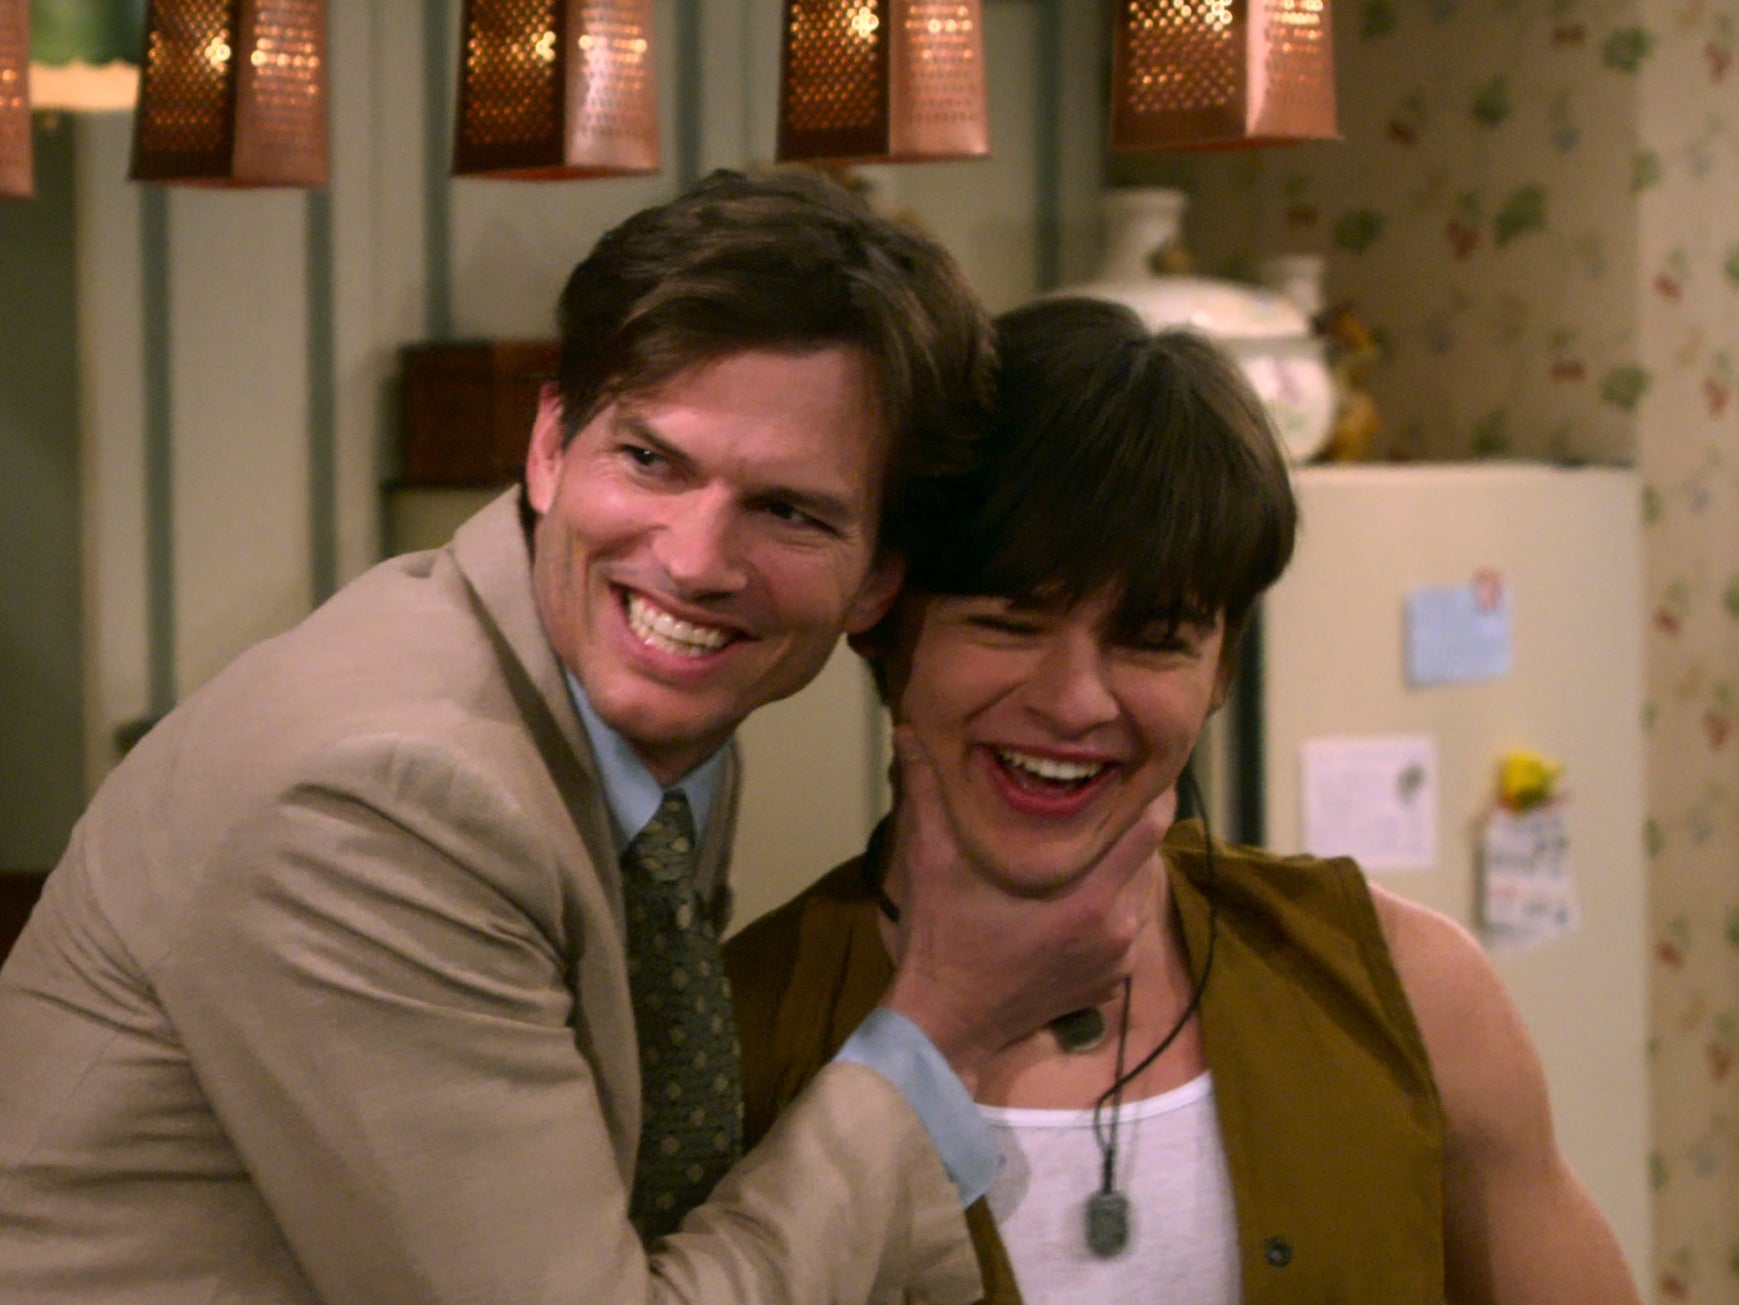 Ashton Kutcher as Michael Kelso and Mace Coronel as Jay Kelso in ‘That 90s Show'